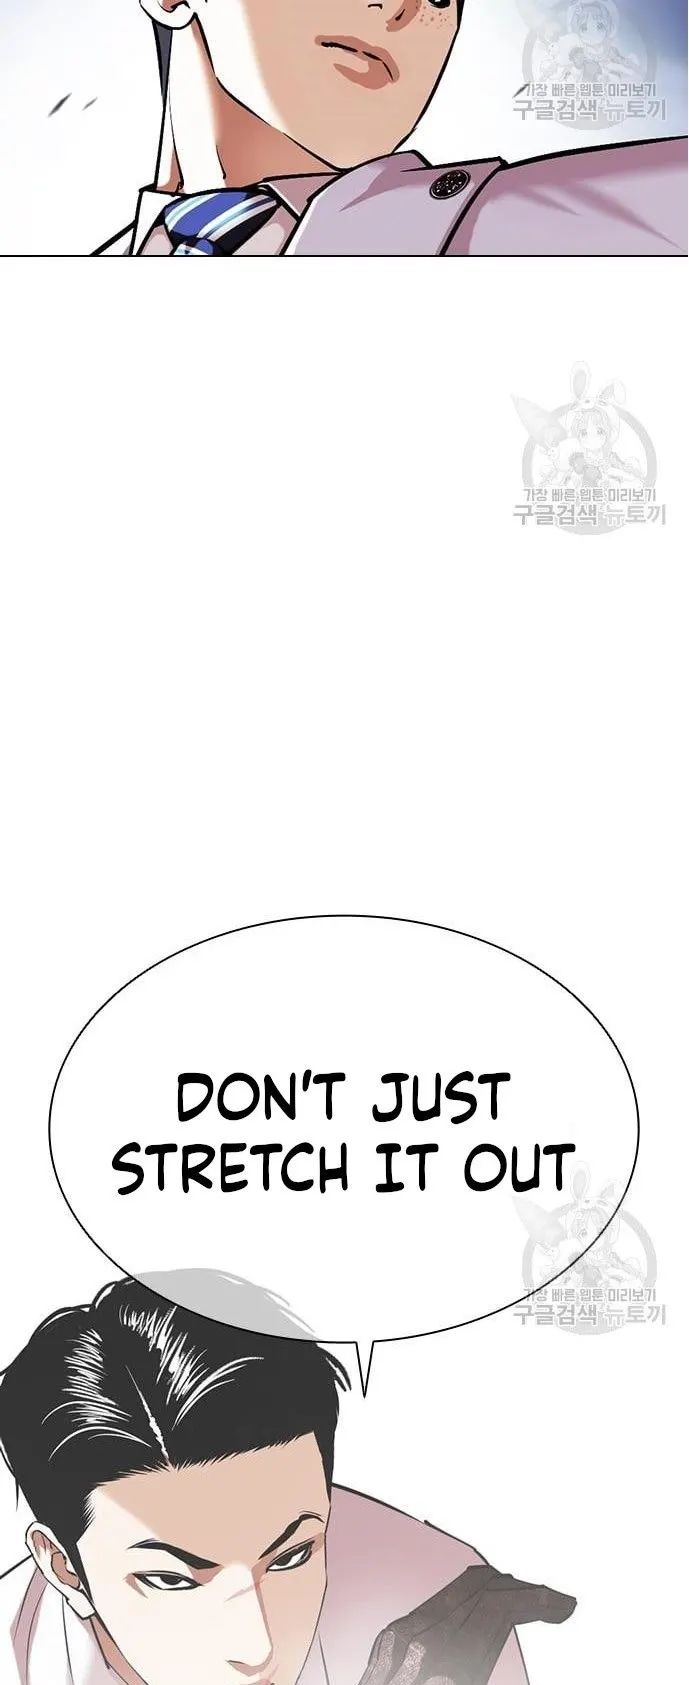 Lookism Chapter 421 image 064